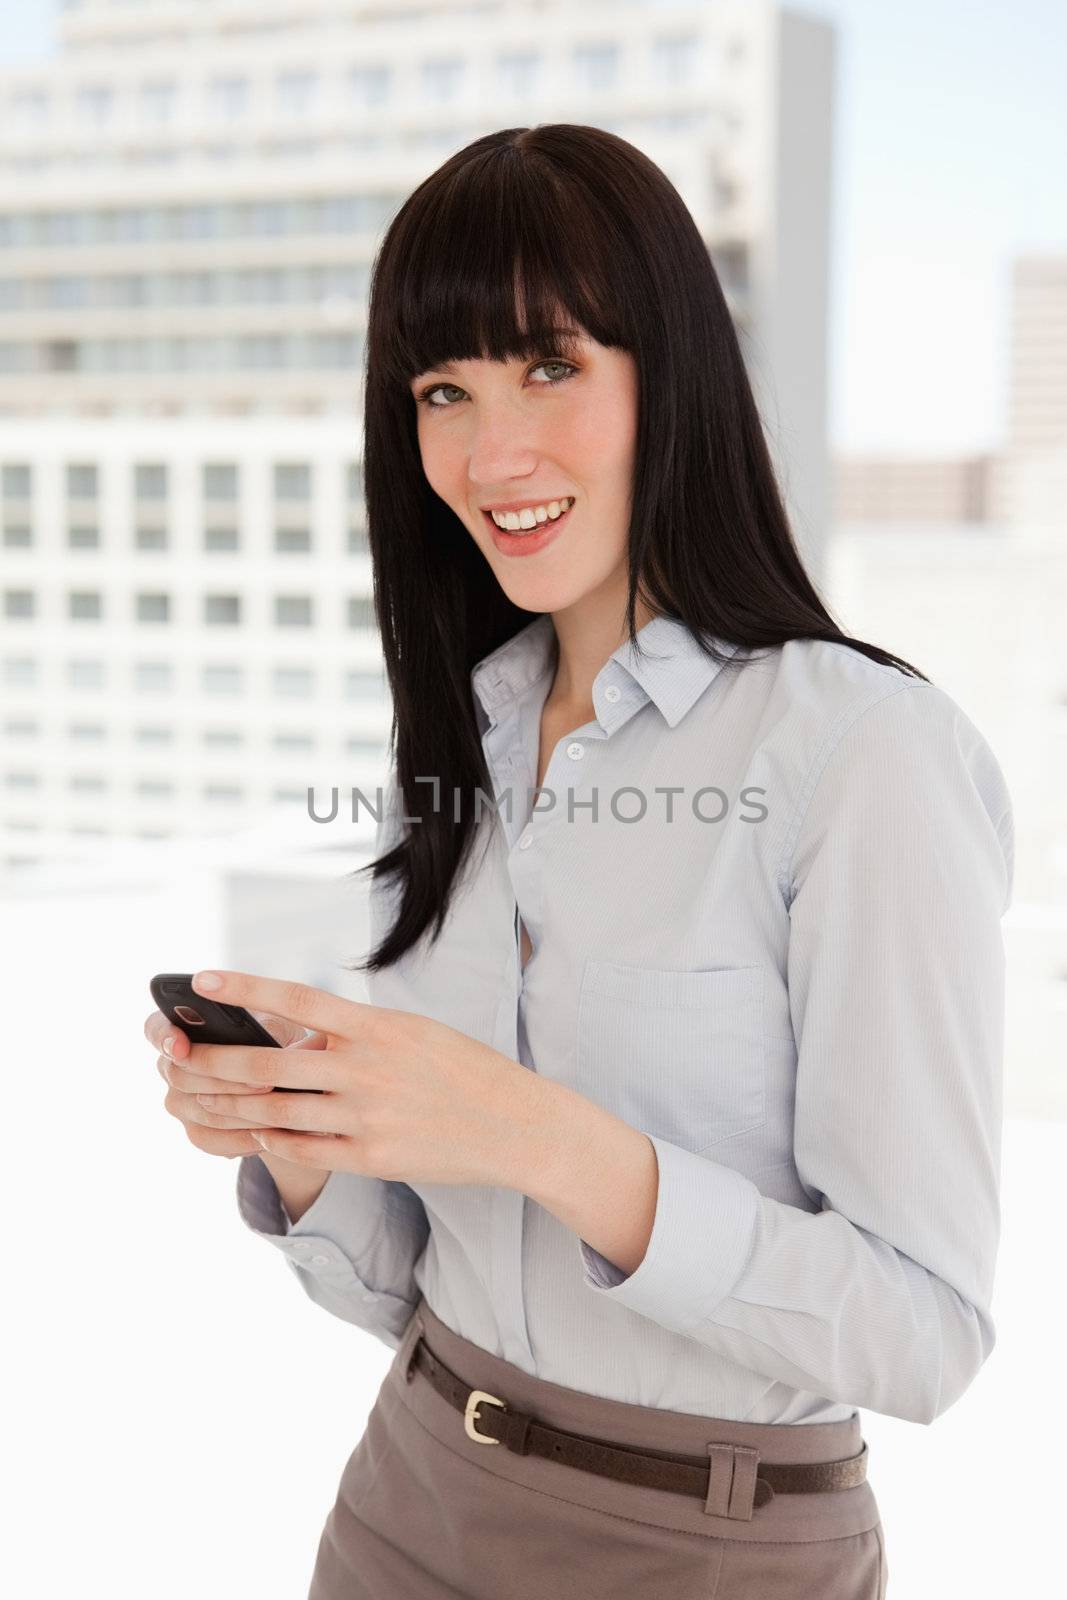 A smiling woman texting on her mobile as she looks straight ahead